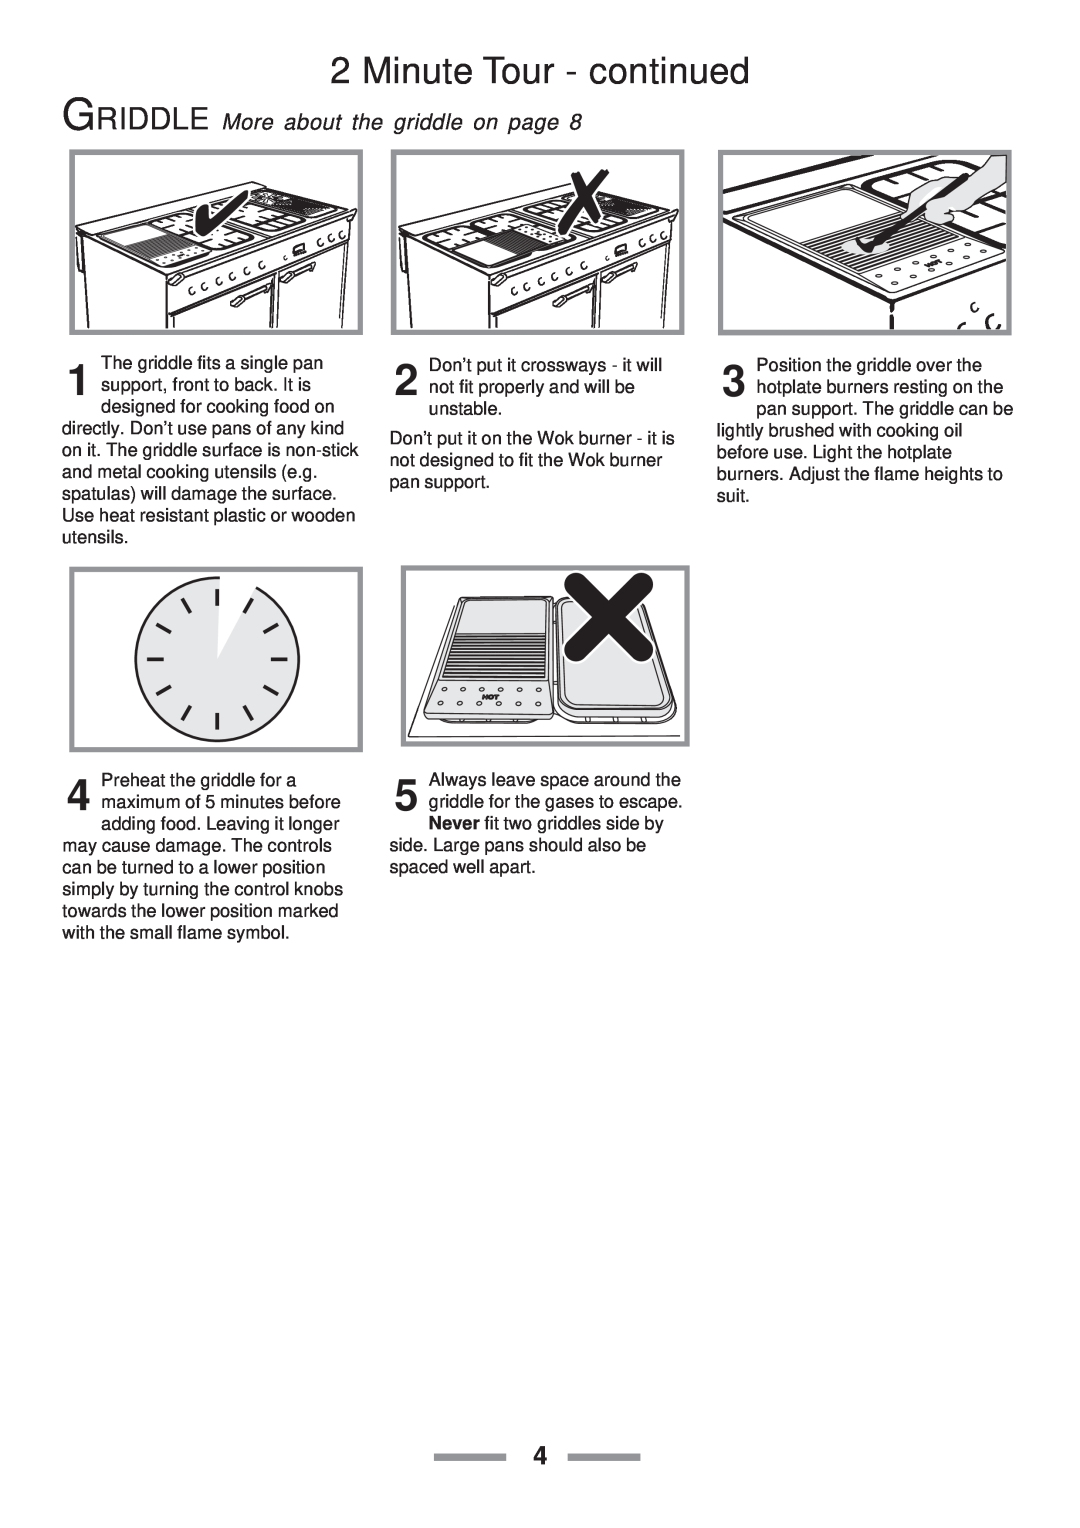 Rangemaster 110 installation instructions Minute Tour - continued, GRIDDLE More about the griddle on page 